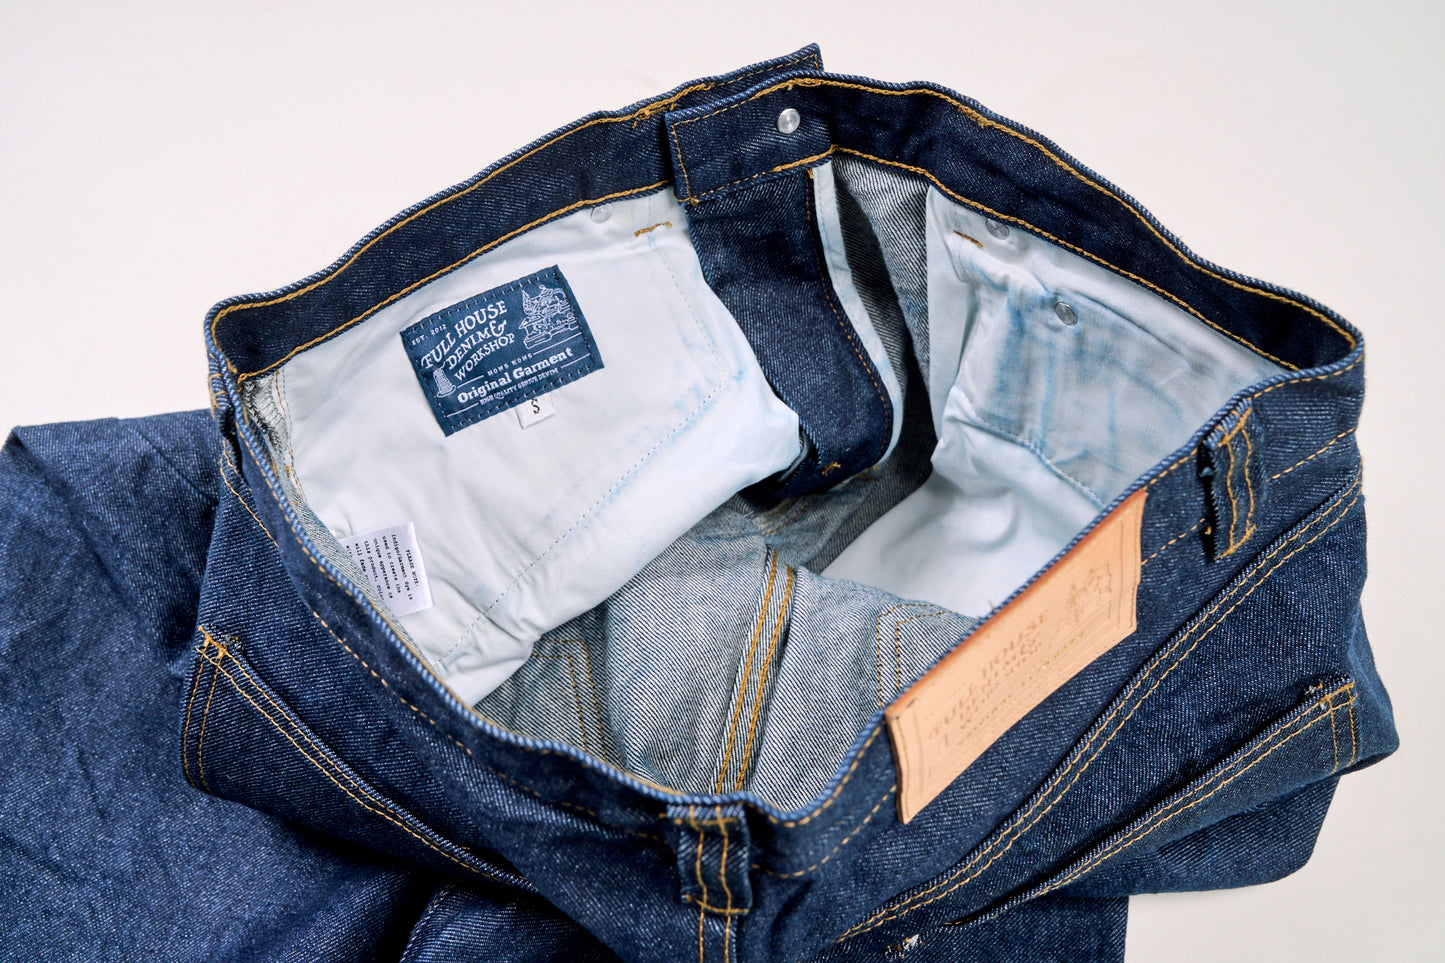 13oz. Selvage 1940s High Waist Unwashed Jeans